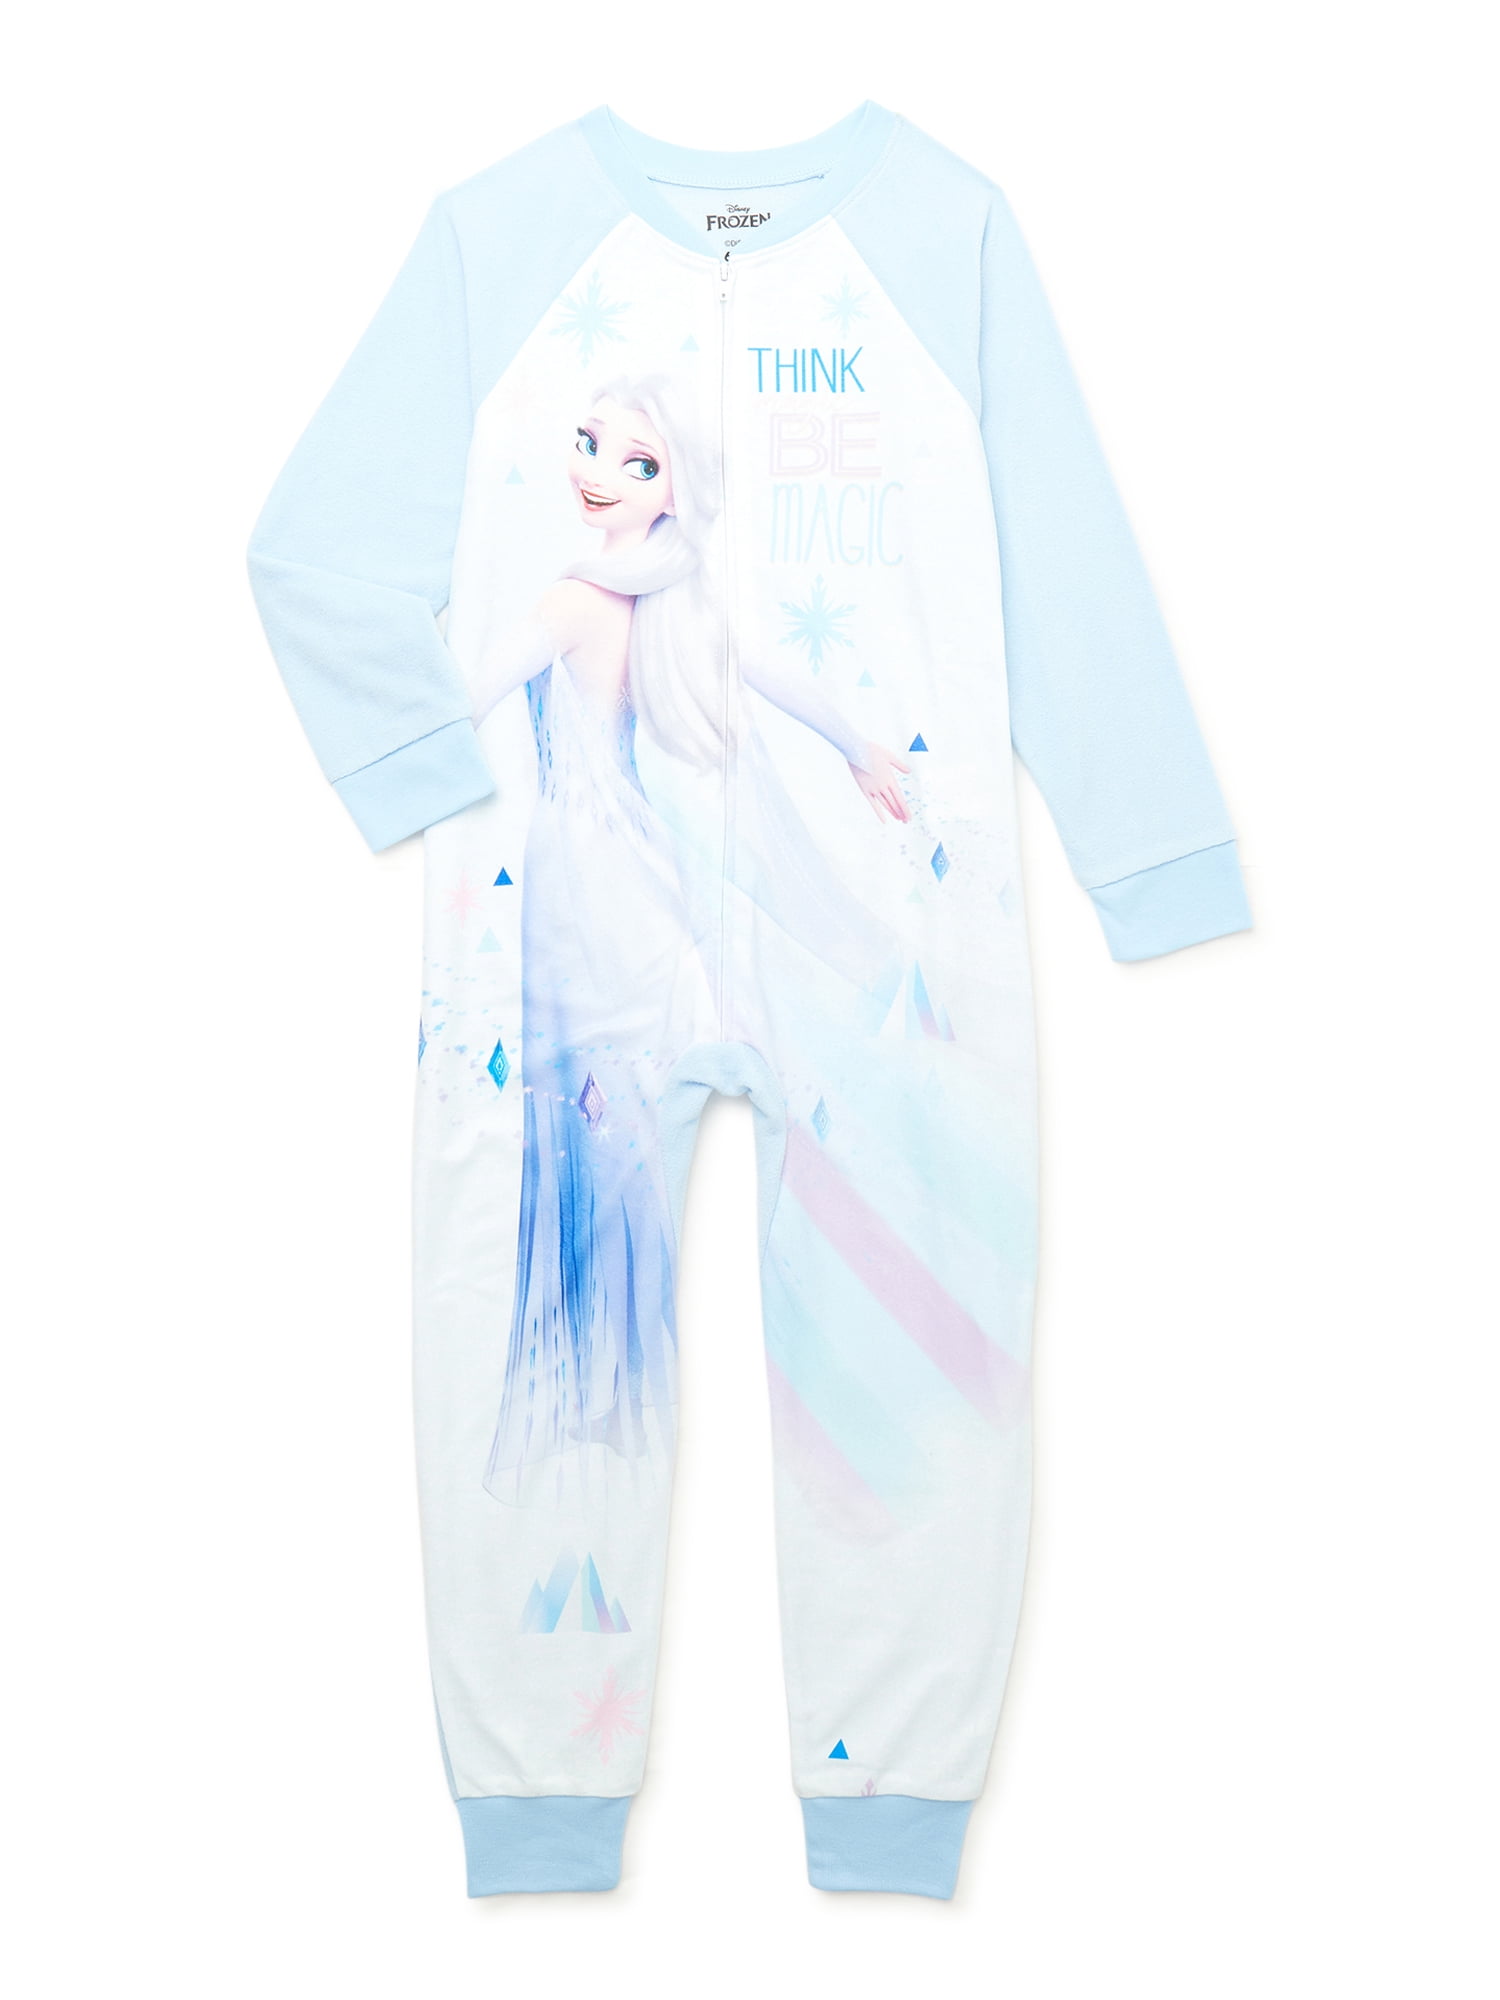 Disney Women's One Piece Pajama Set Union Suit Sleepwear, Step In and Zip  It Up — That's All That's Required From These Disney Halloween Onesies